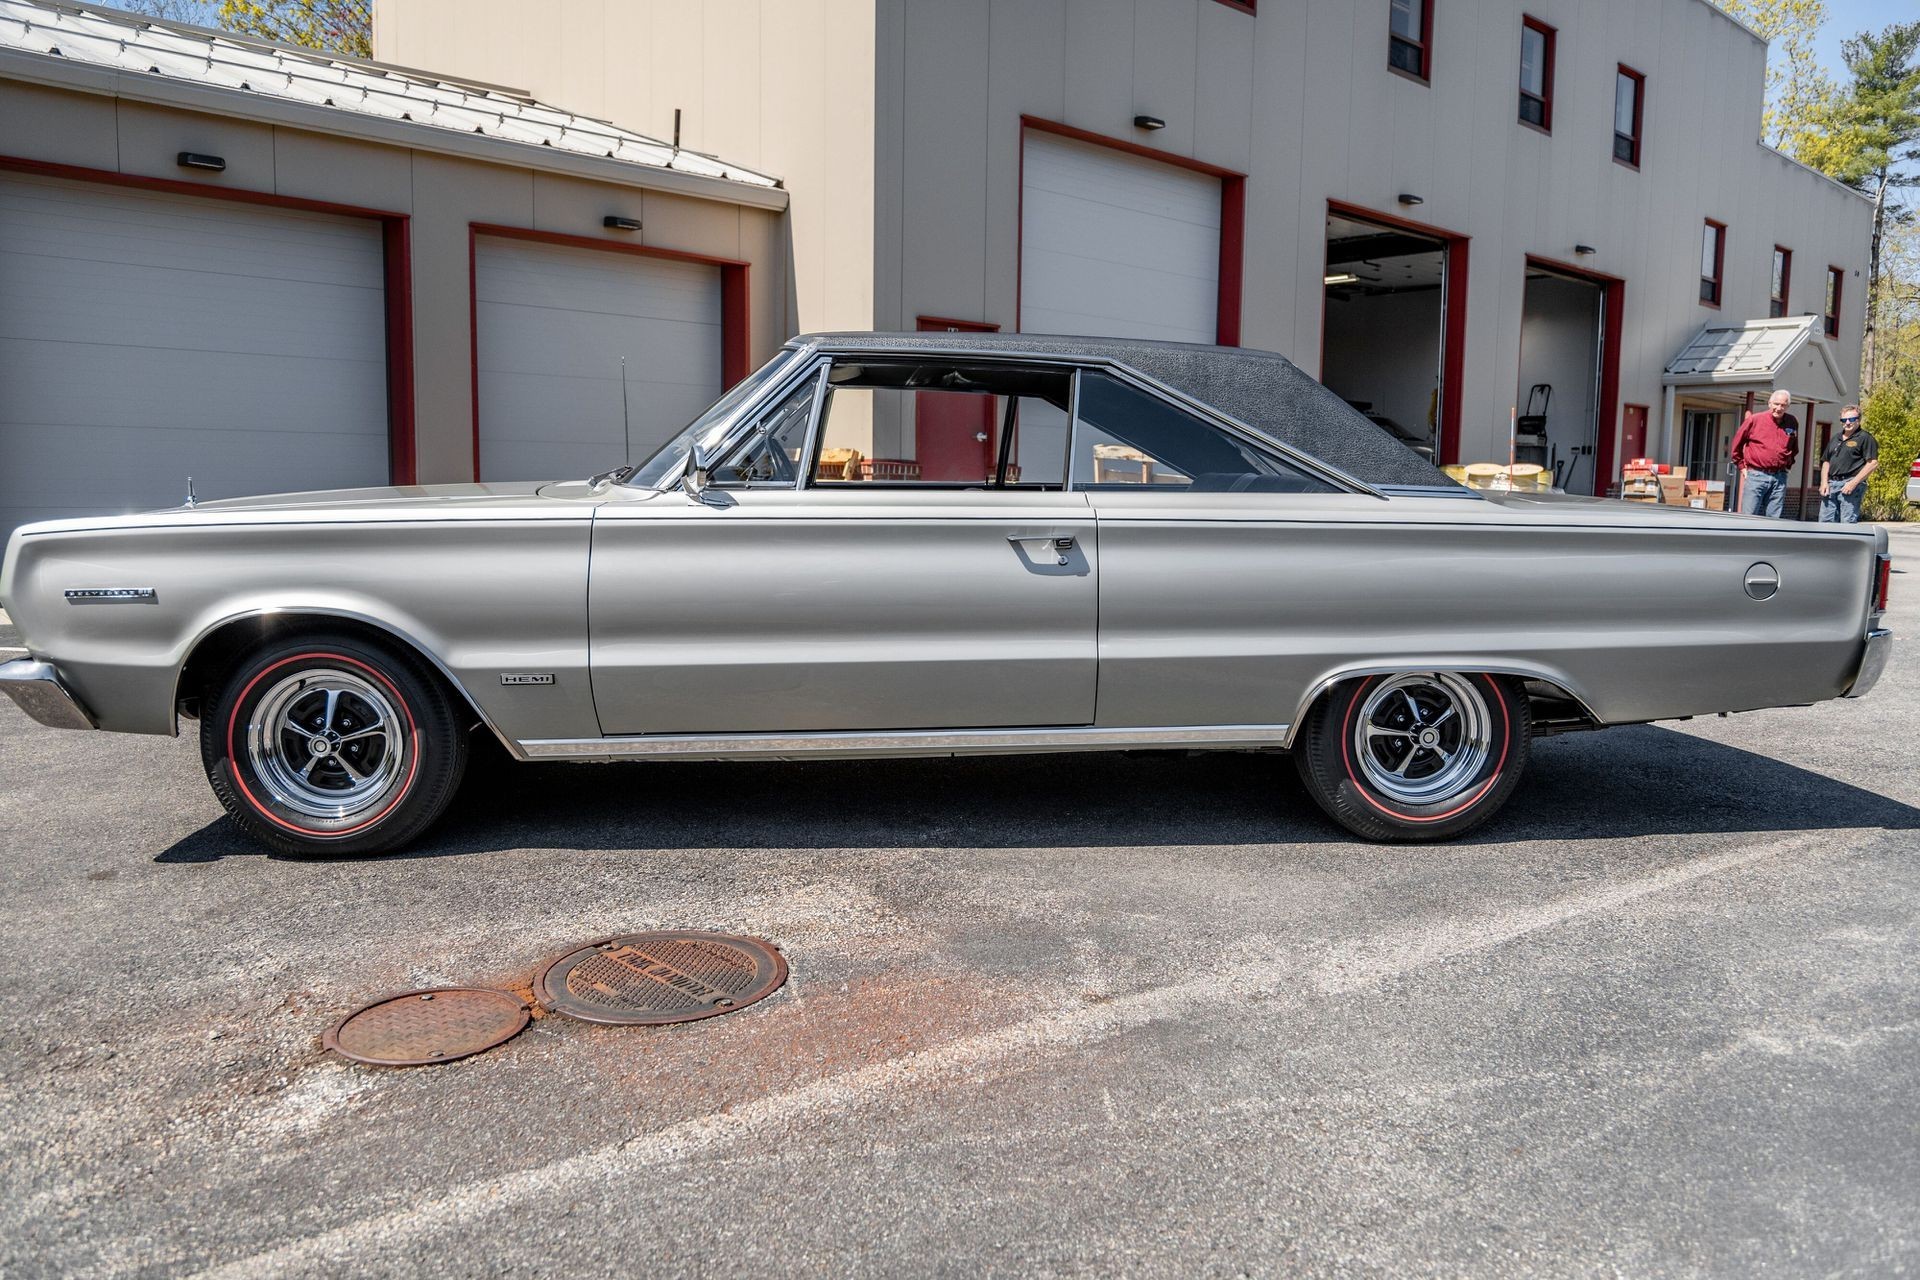 This 1967 Belvedere II HEMI Is a Ghost: The One-Off 426-Cube V8